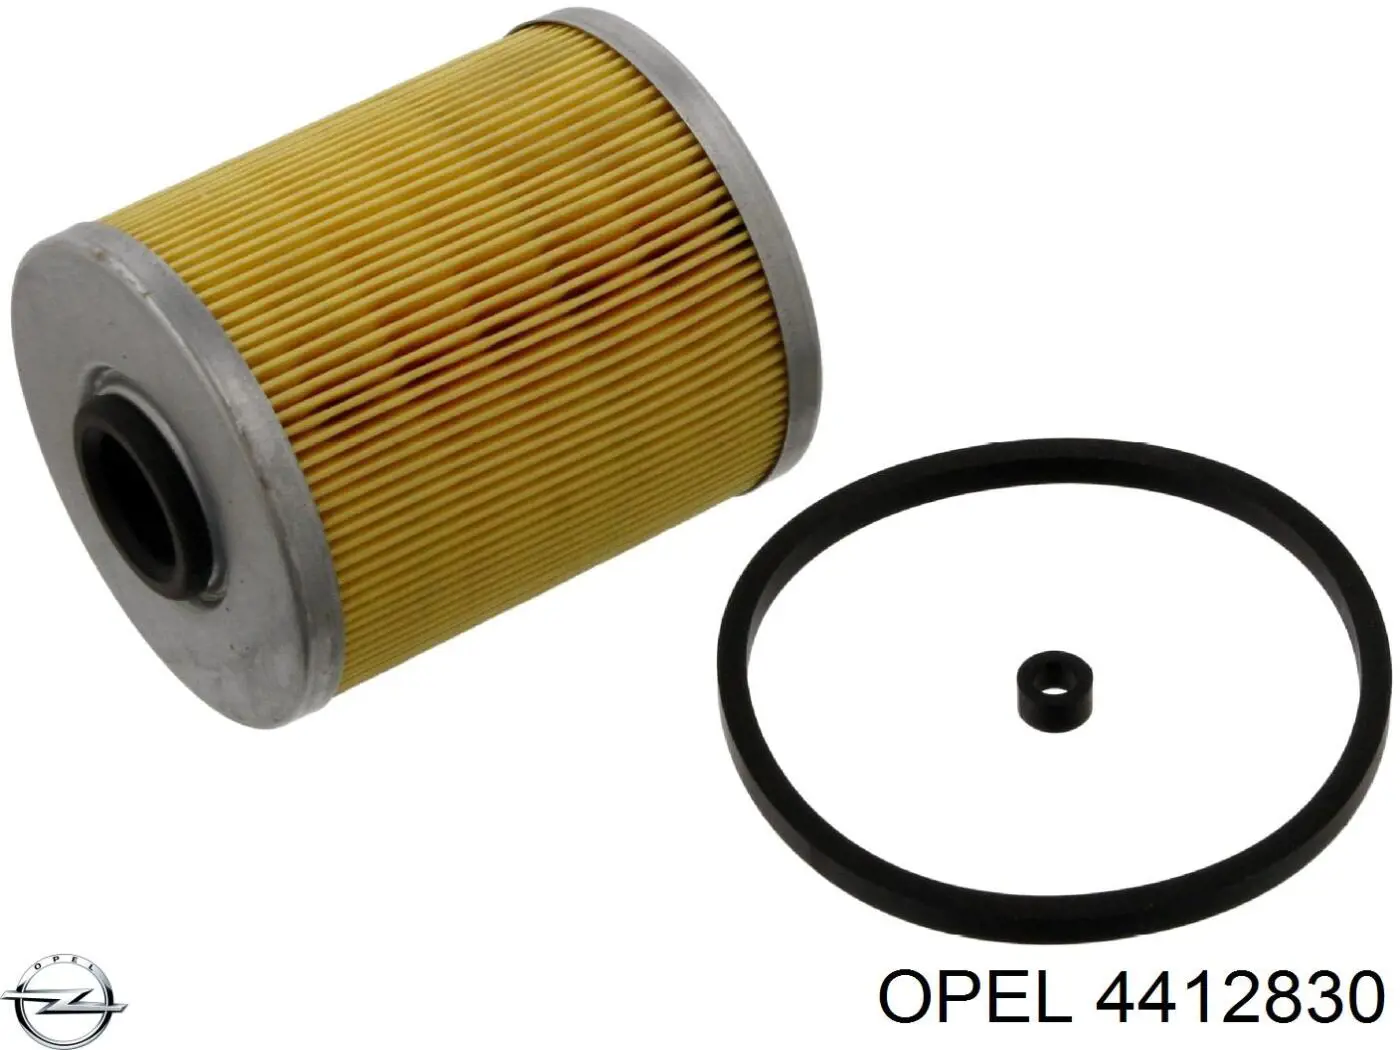 4412830 Opel filtro combustible